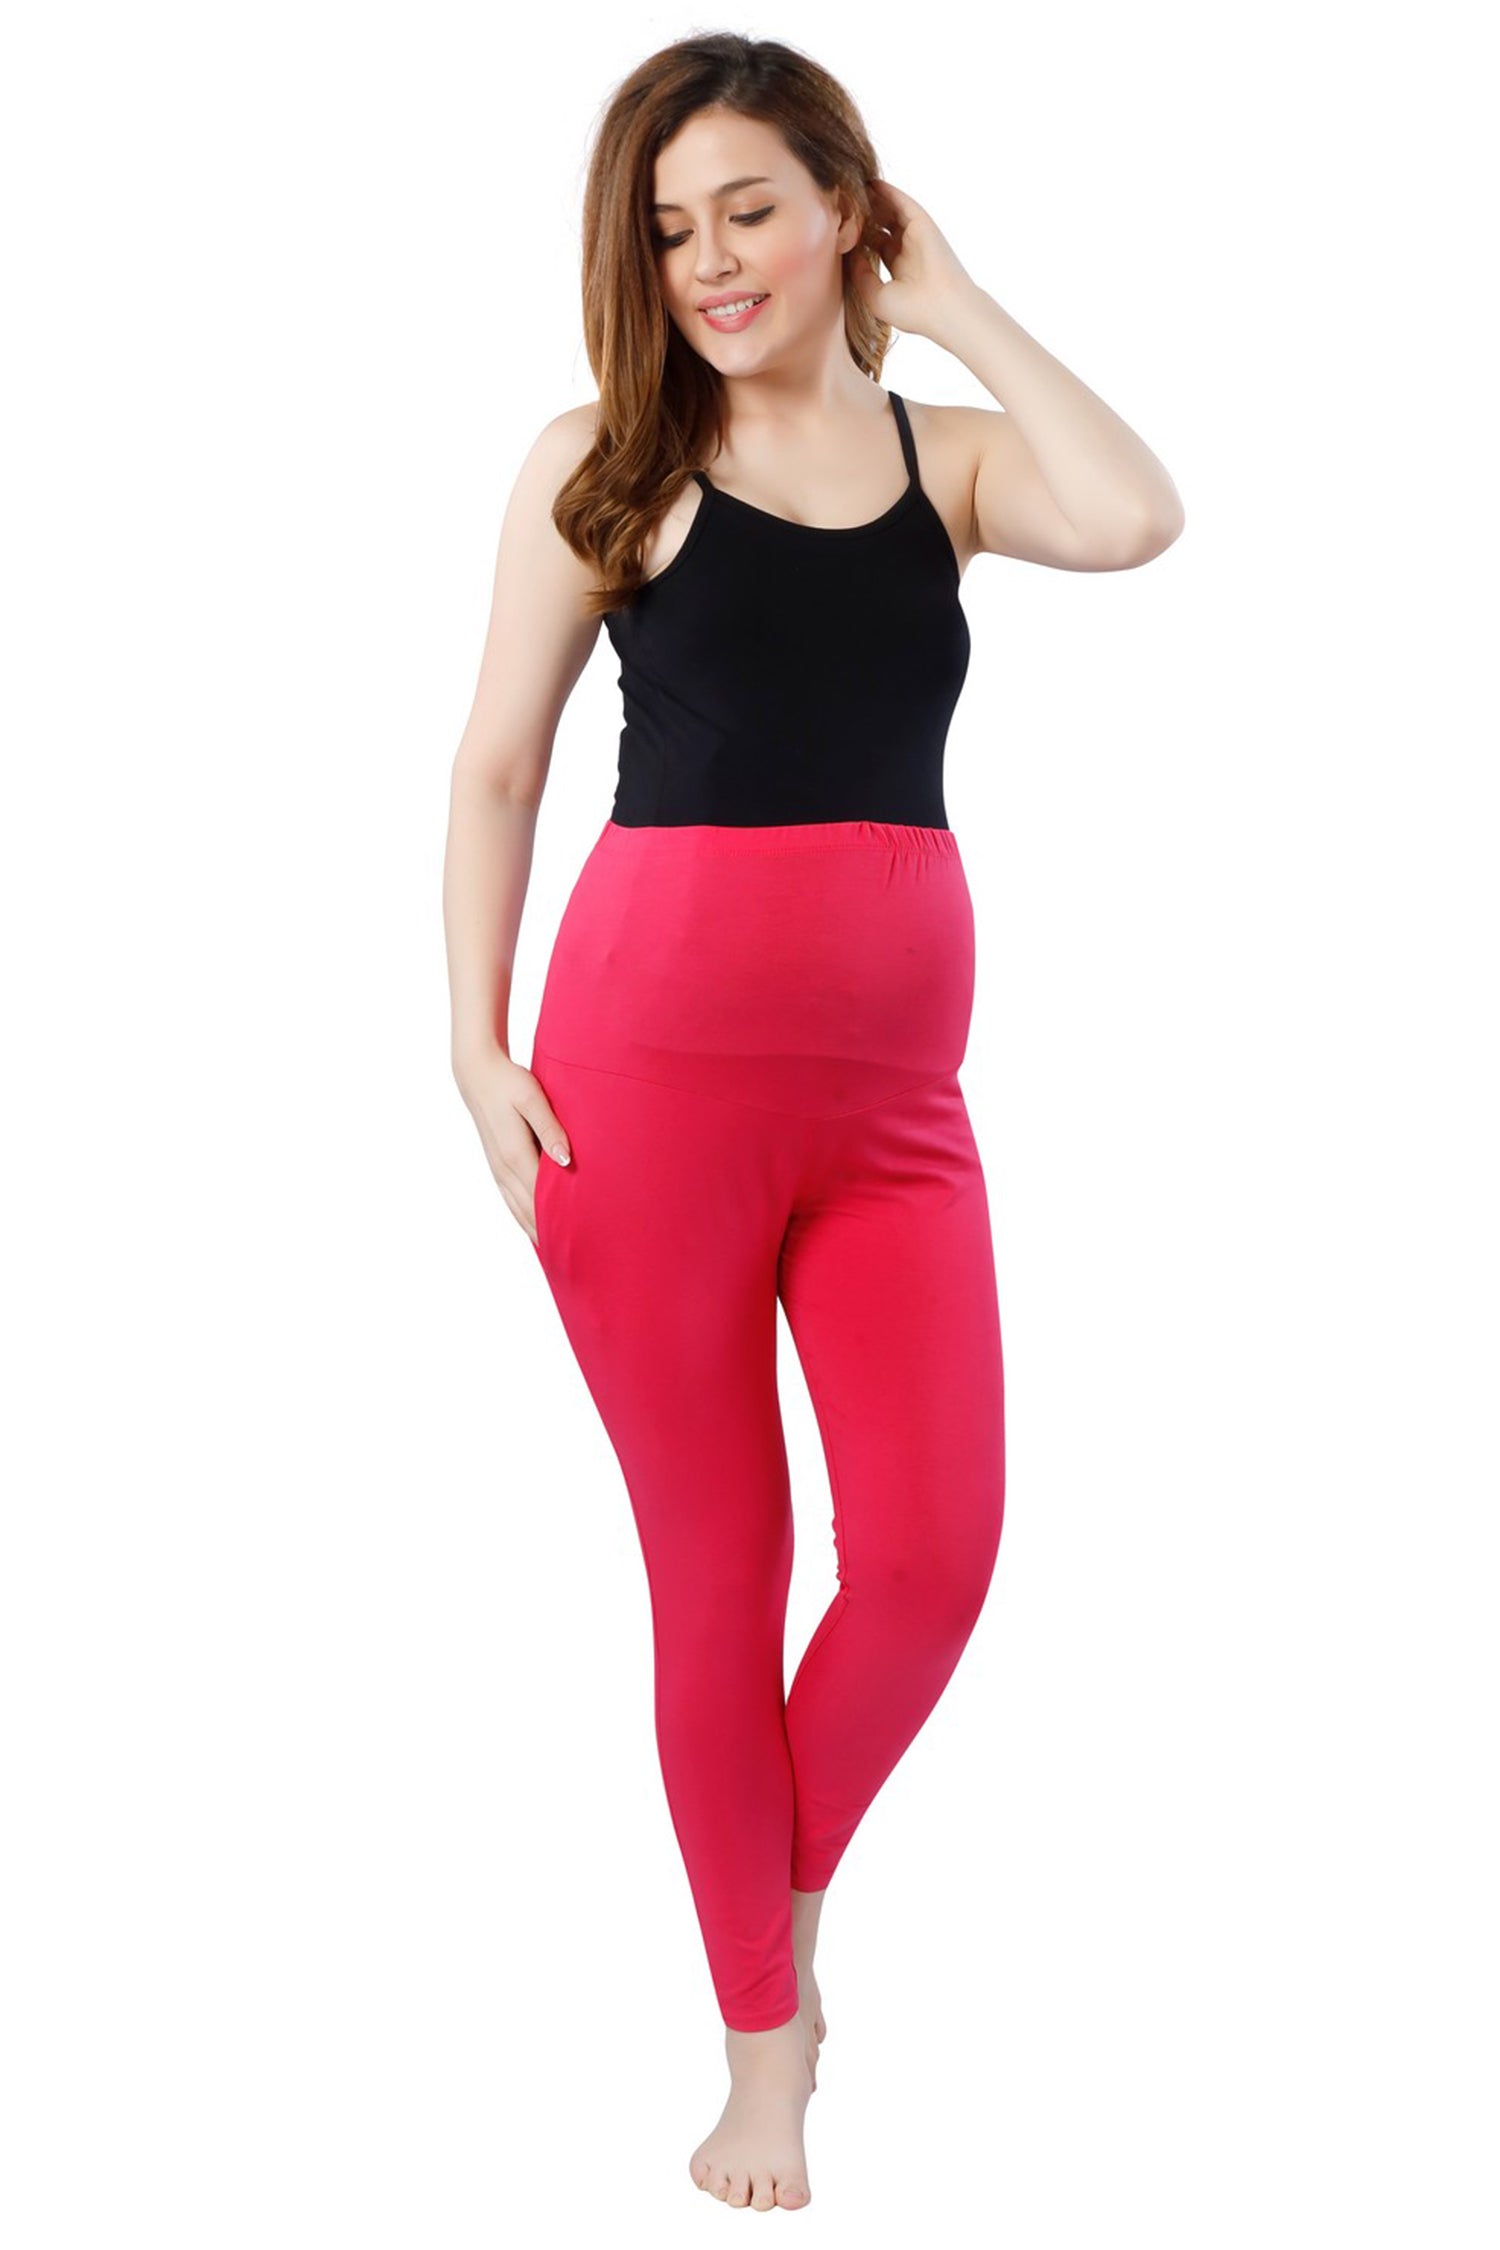 CTHH Maternity Leggings for Women Over The Belly - India